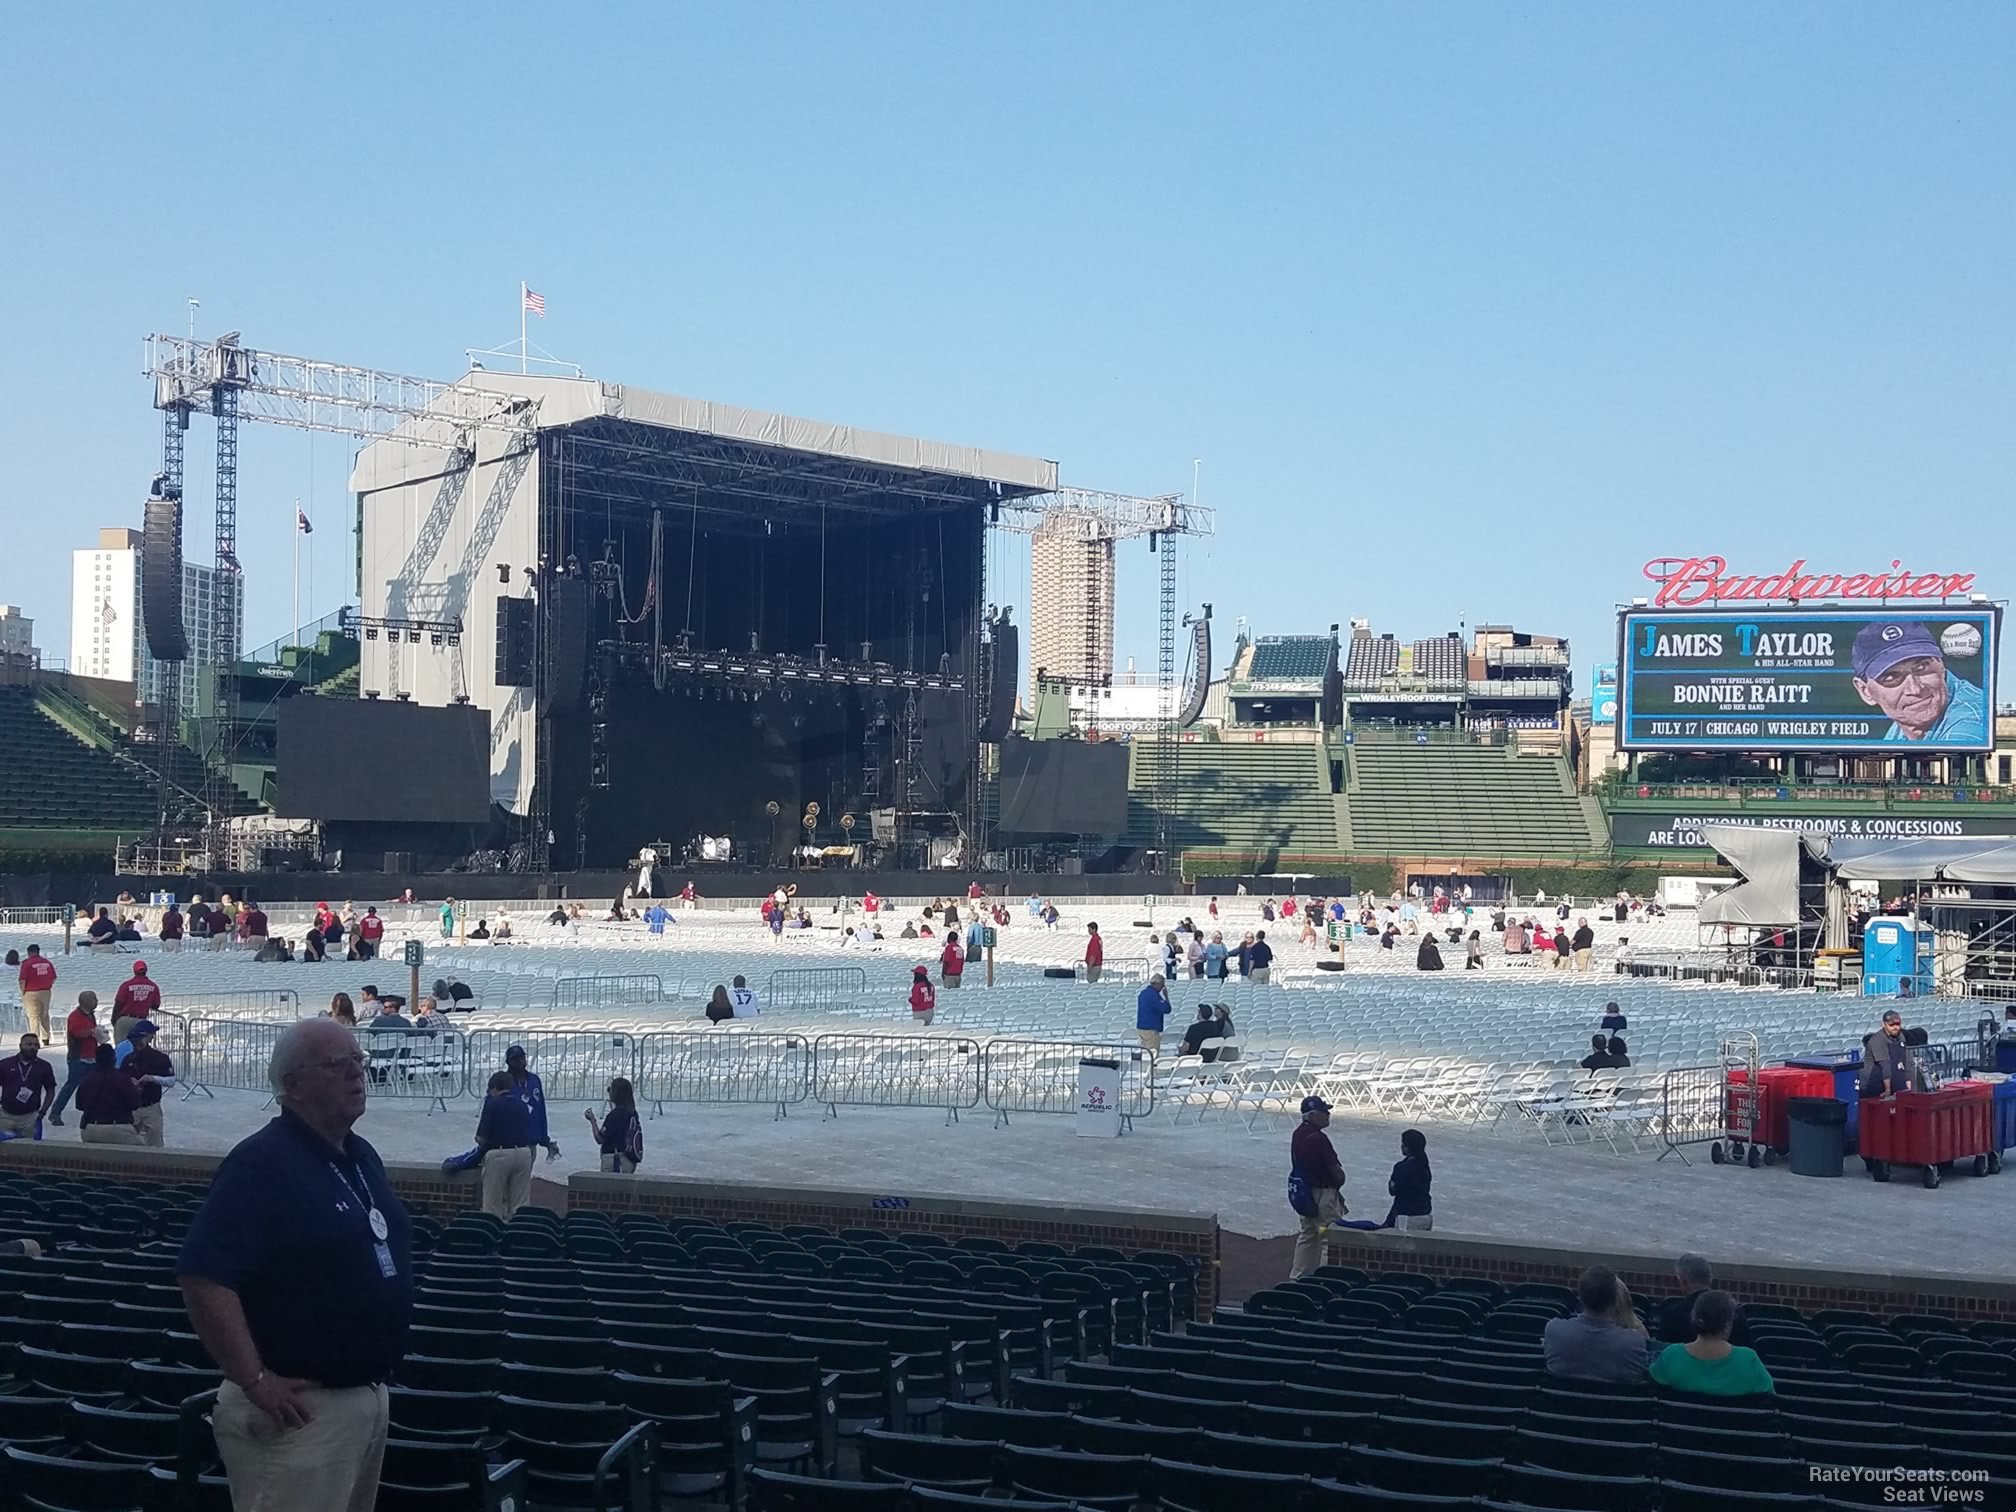 section 108, row 4 seat view  for concert - wrigley field